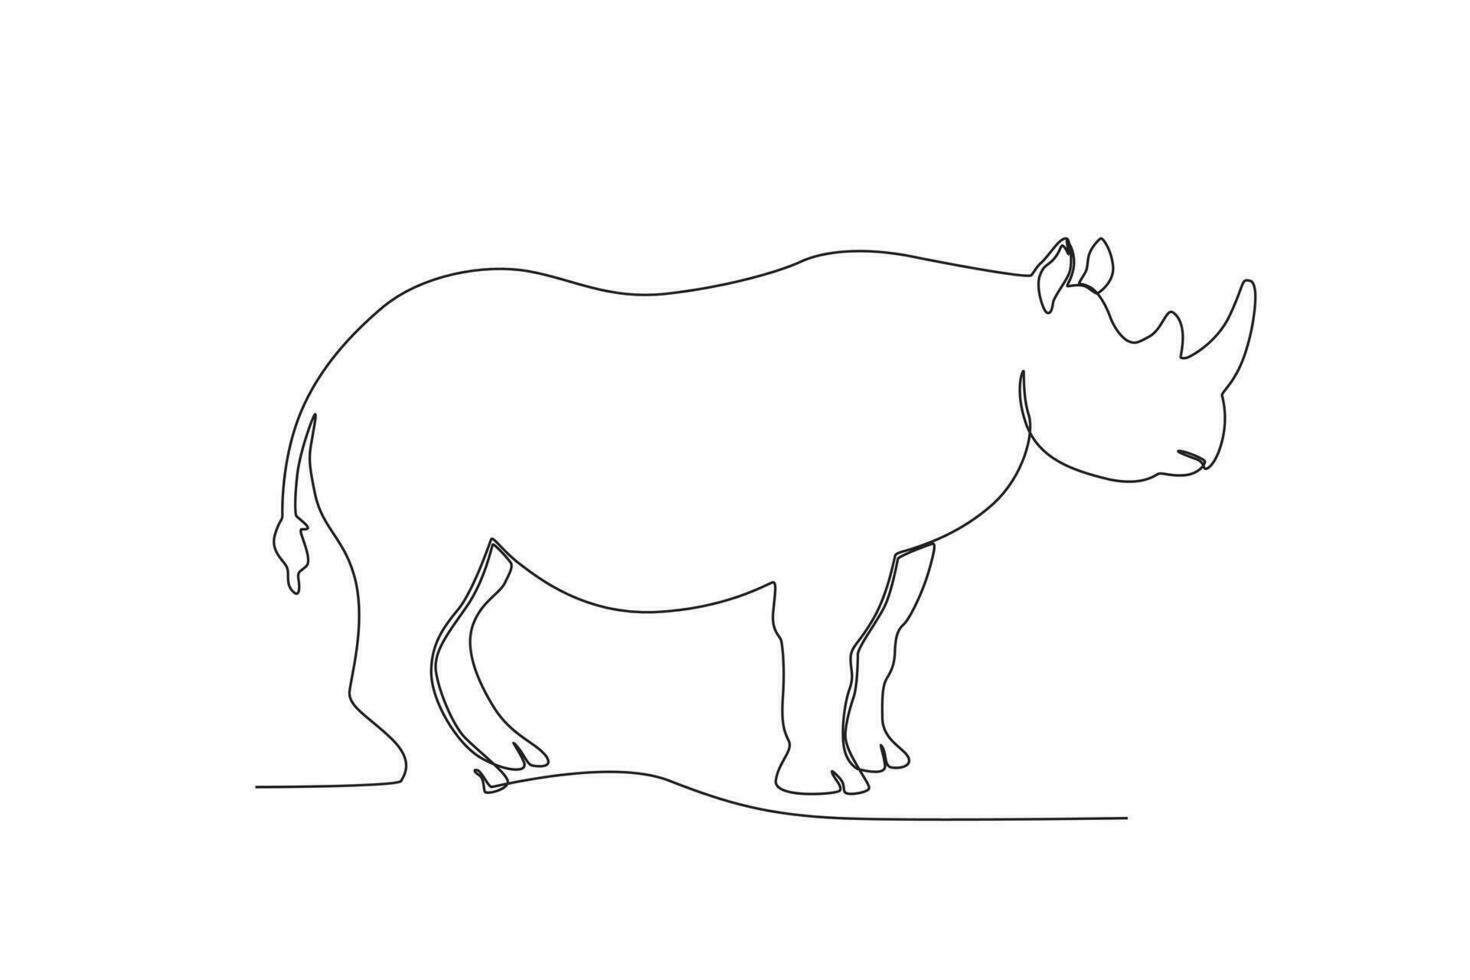 Single one line drawing of a rhinoceros. Continuous line draw design graphic vector illustration.